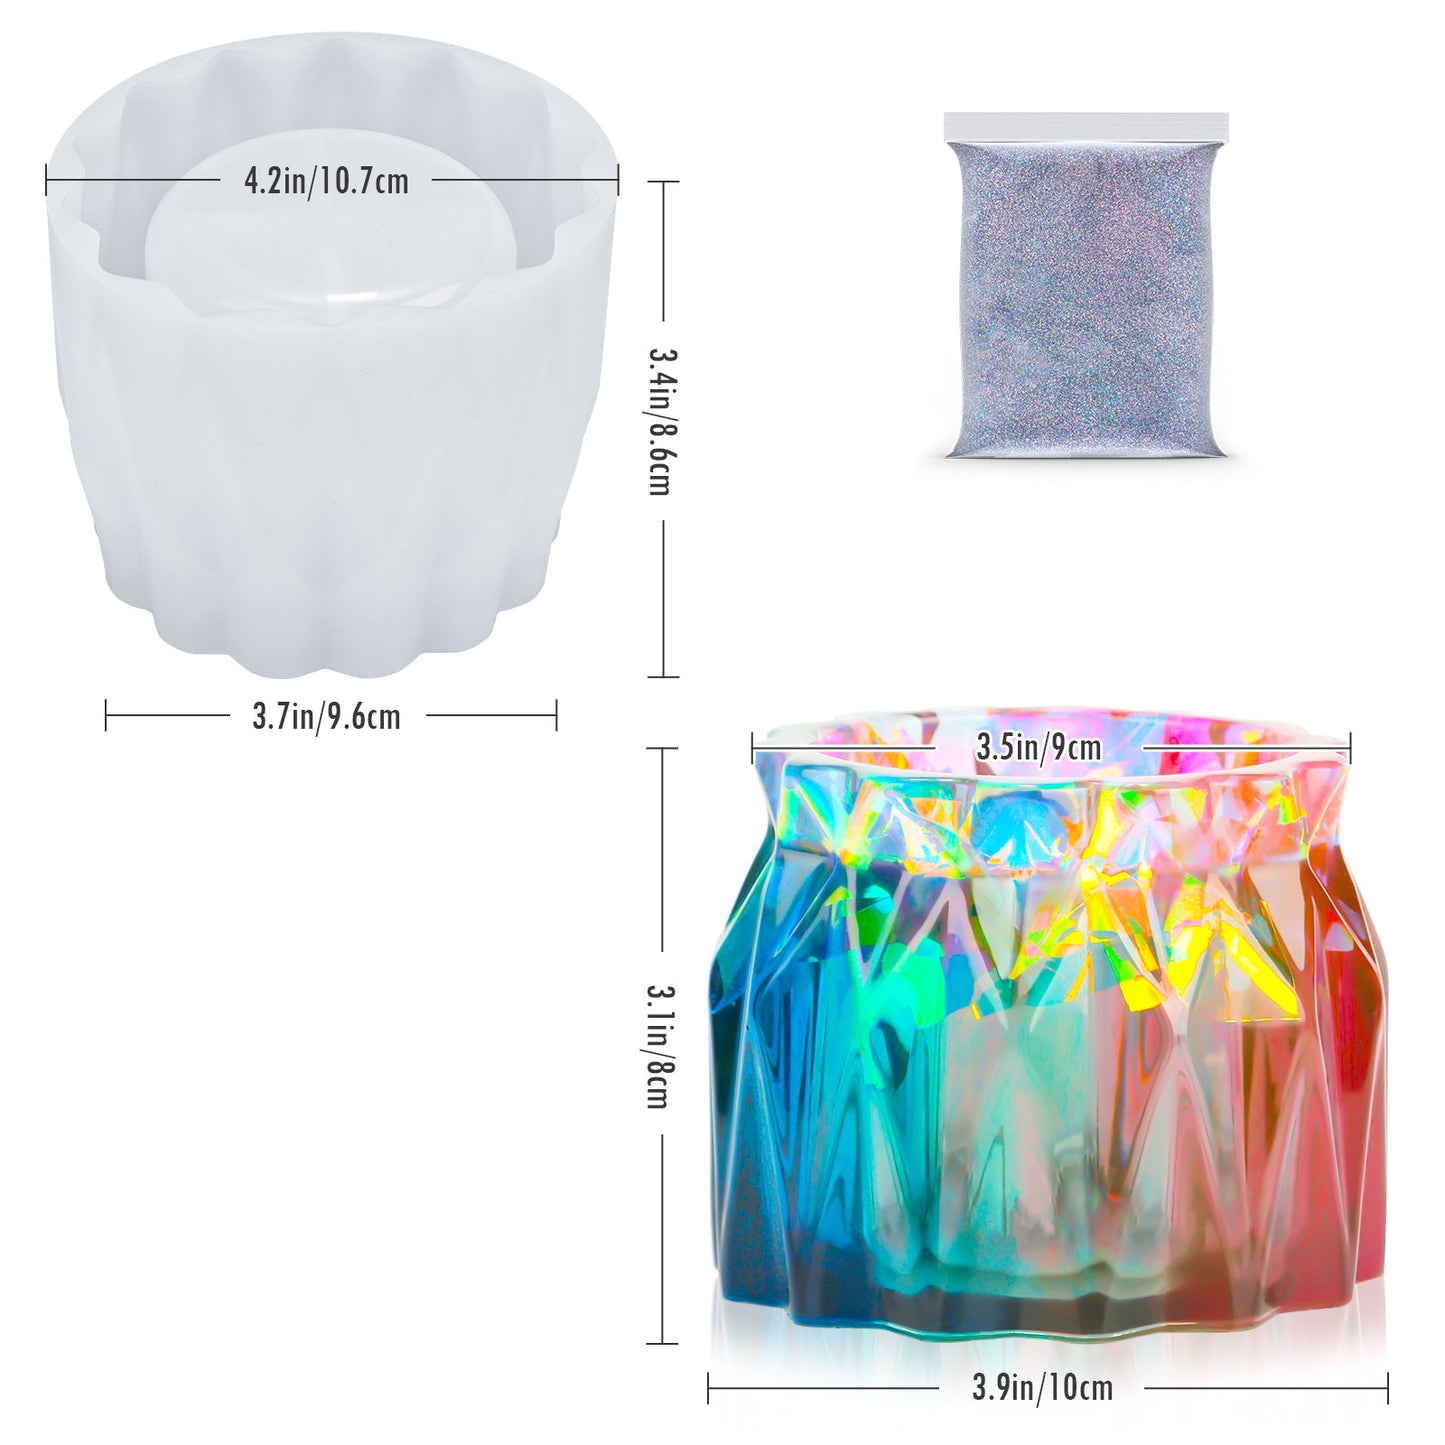 Epoxy Resin Diamond Faceted Vase DIY Casting Silicone Mold Kit+Glitters, Flowe